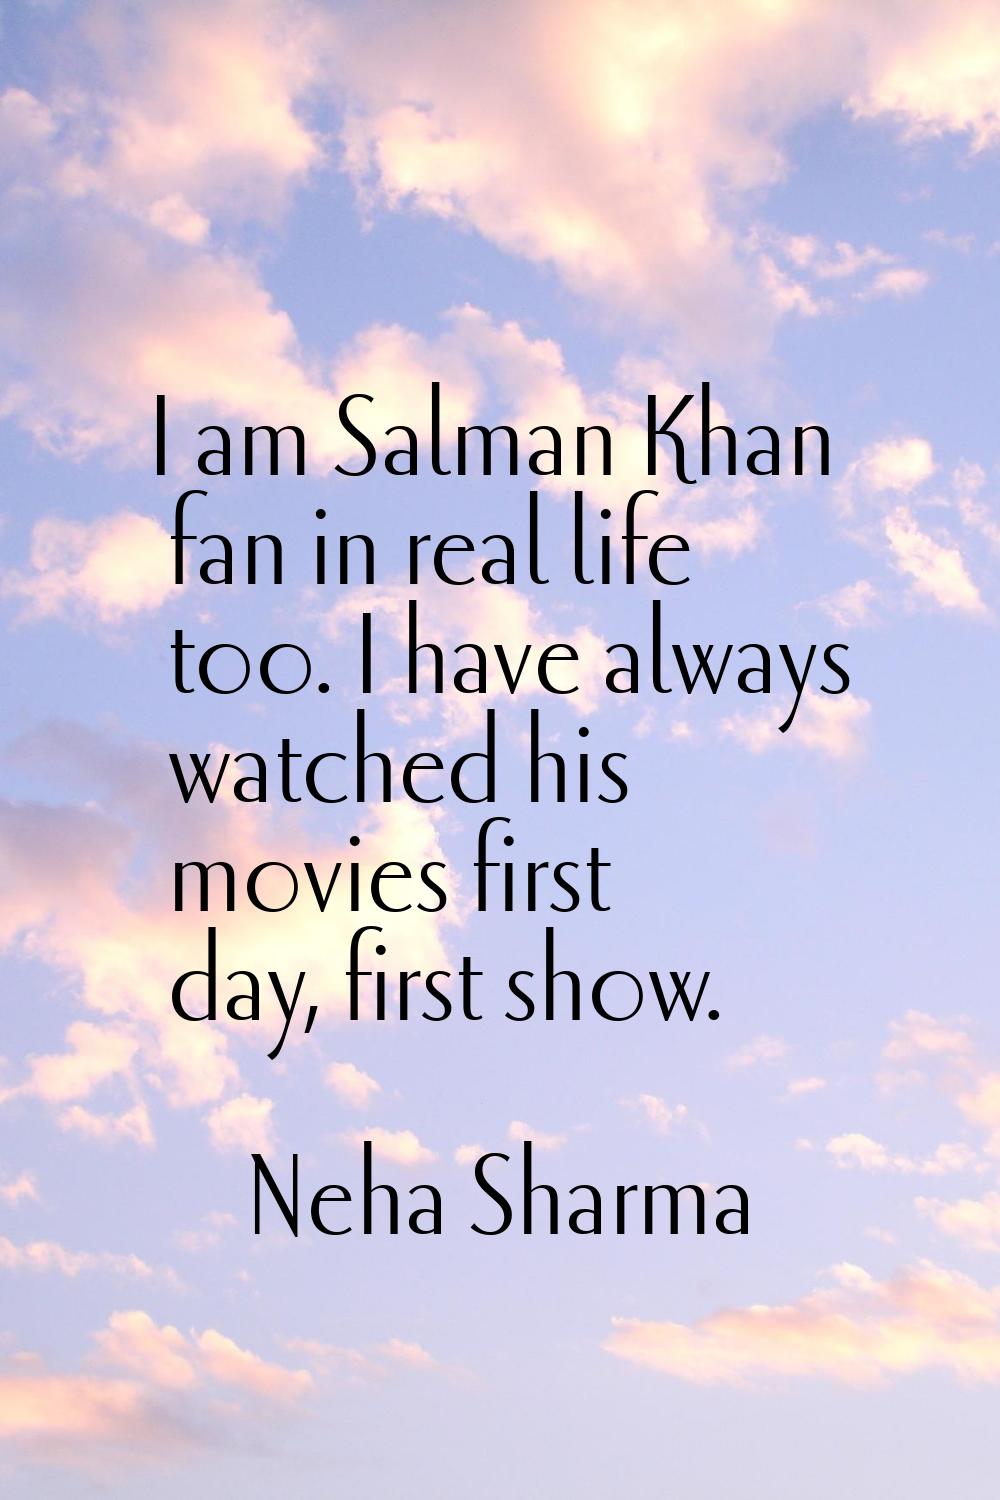 I am Salman Khan fan in real life too. I have always watched his movies first day, first show.